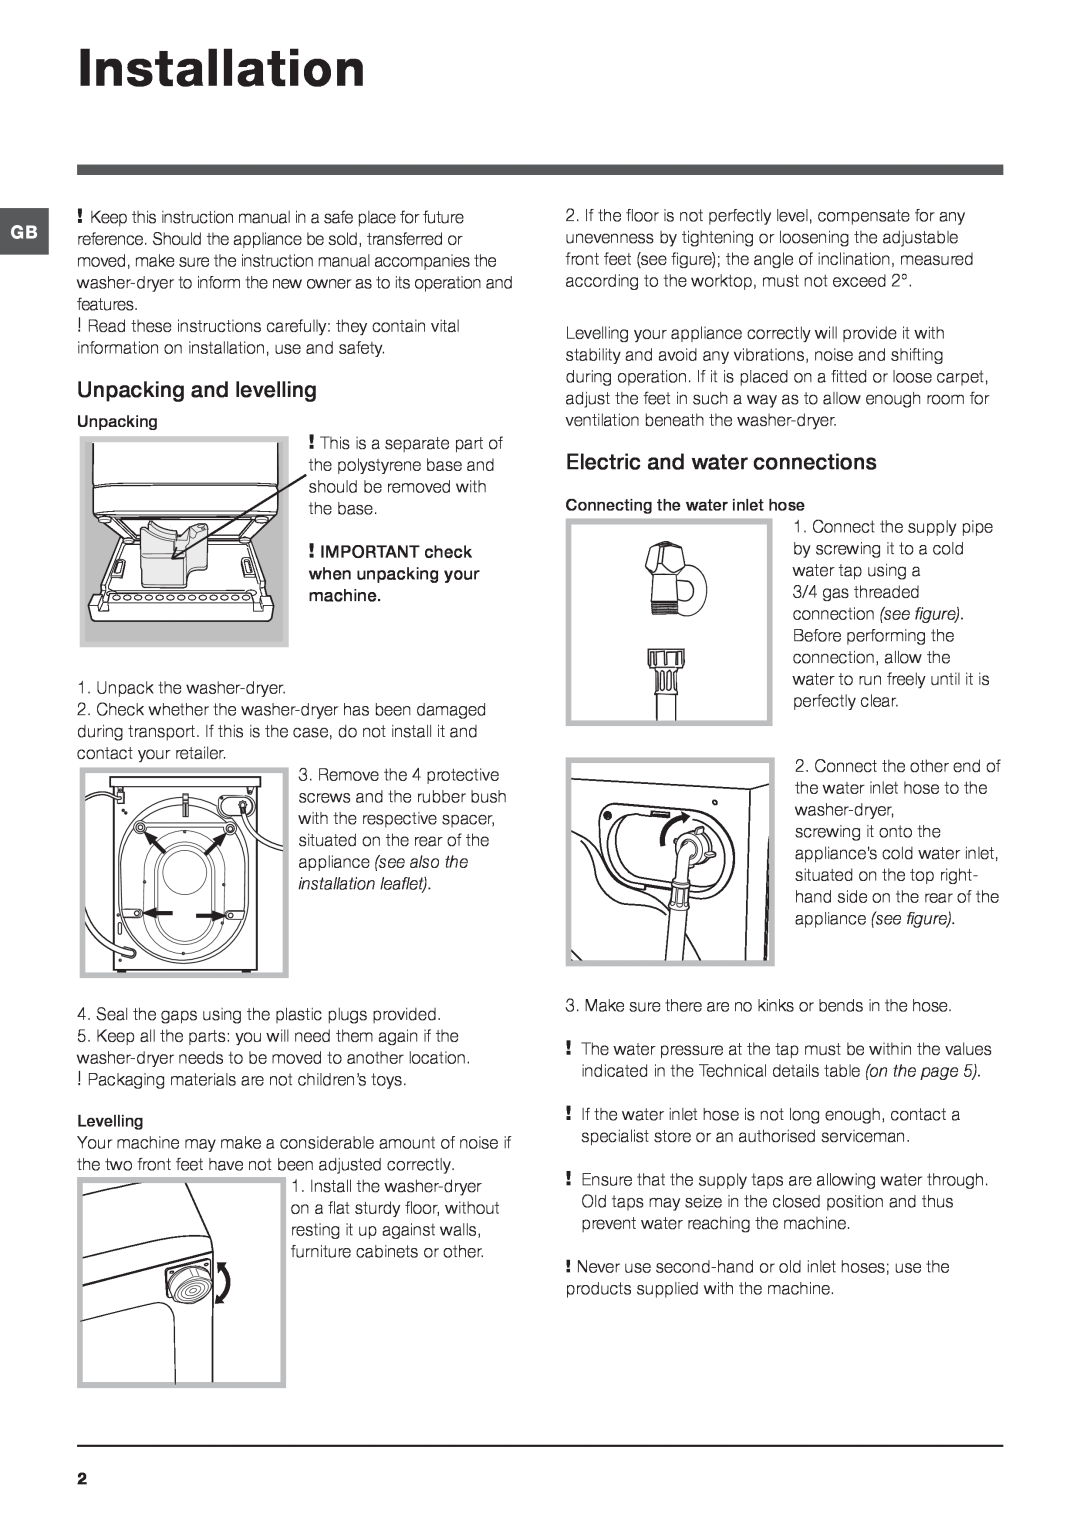 Hotpoint WDPG instruction manual Installation, Unpacking and levelling, Electric and water connections 